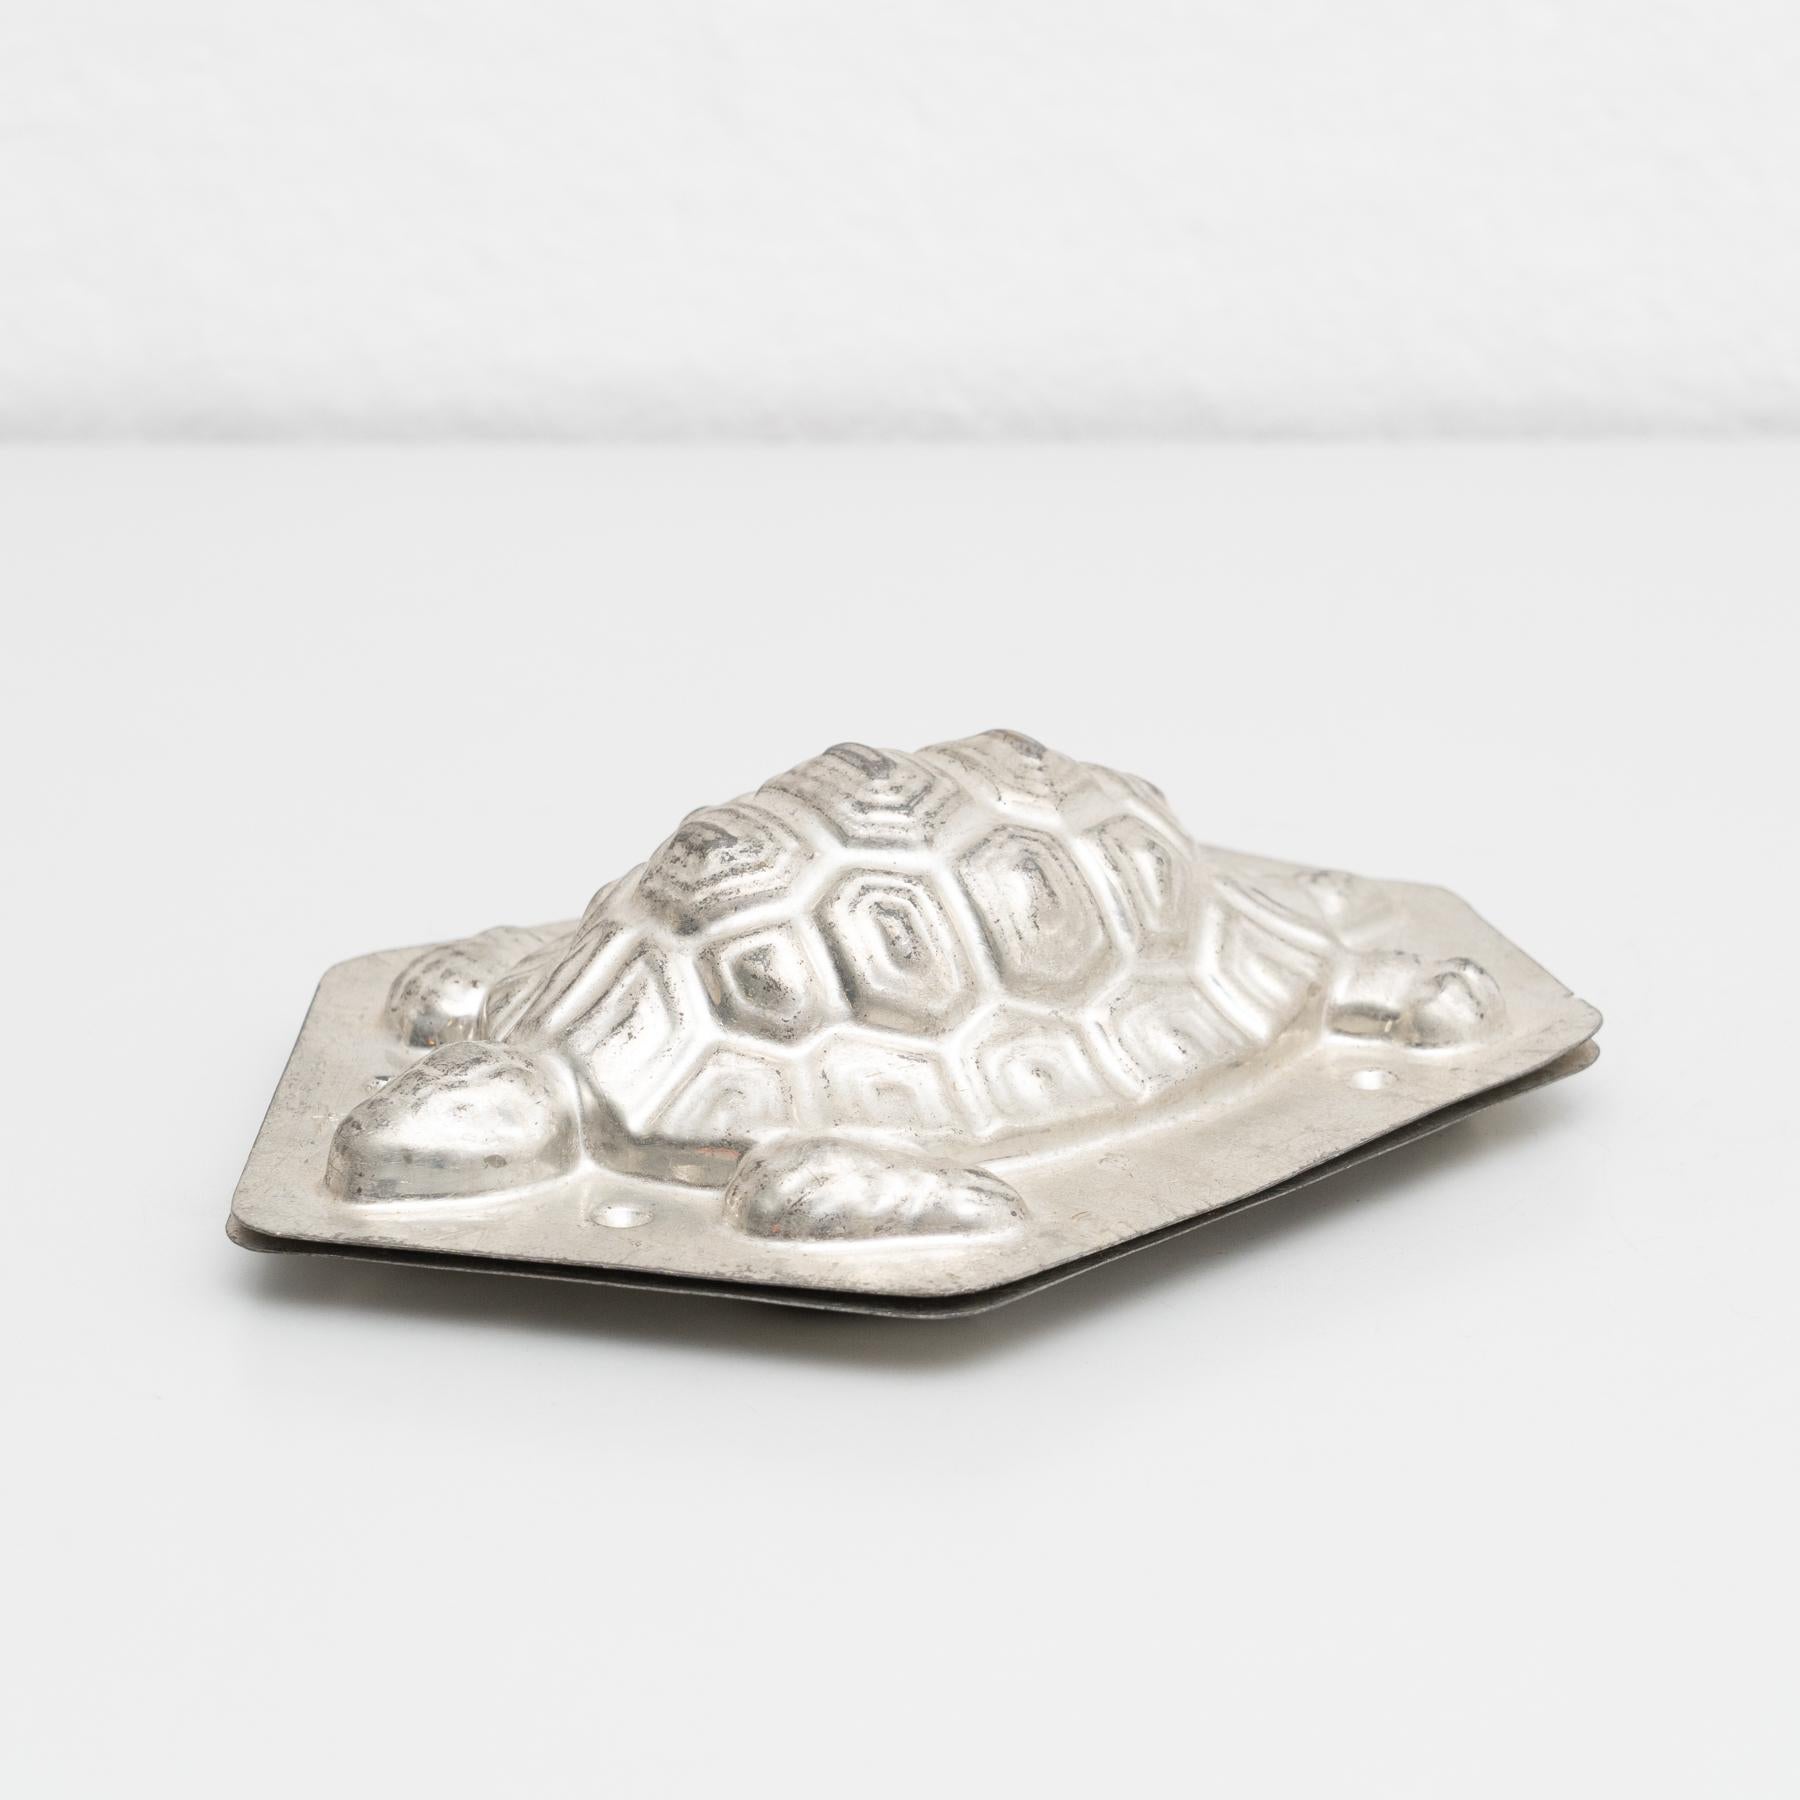 Spanish Antique Turtle Shaped Metal Cooking Mold, circa 1950 For Sale